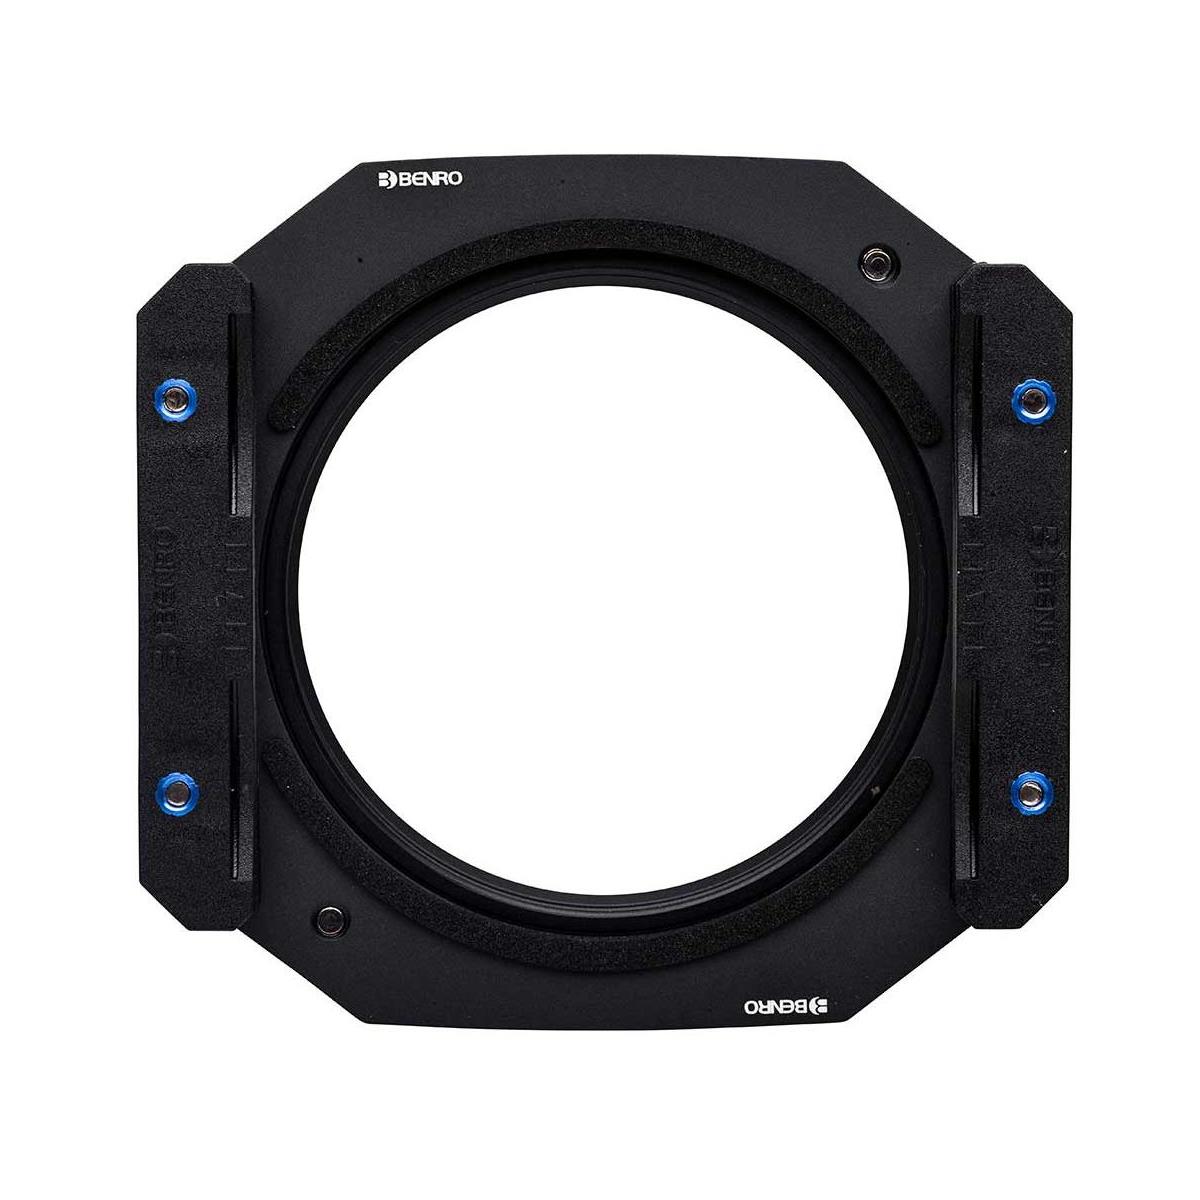 Photos - Other photo accessories Benro Master Series 75mm Filter Holder with FH75R67 67mm Lens Ring FH75 